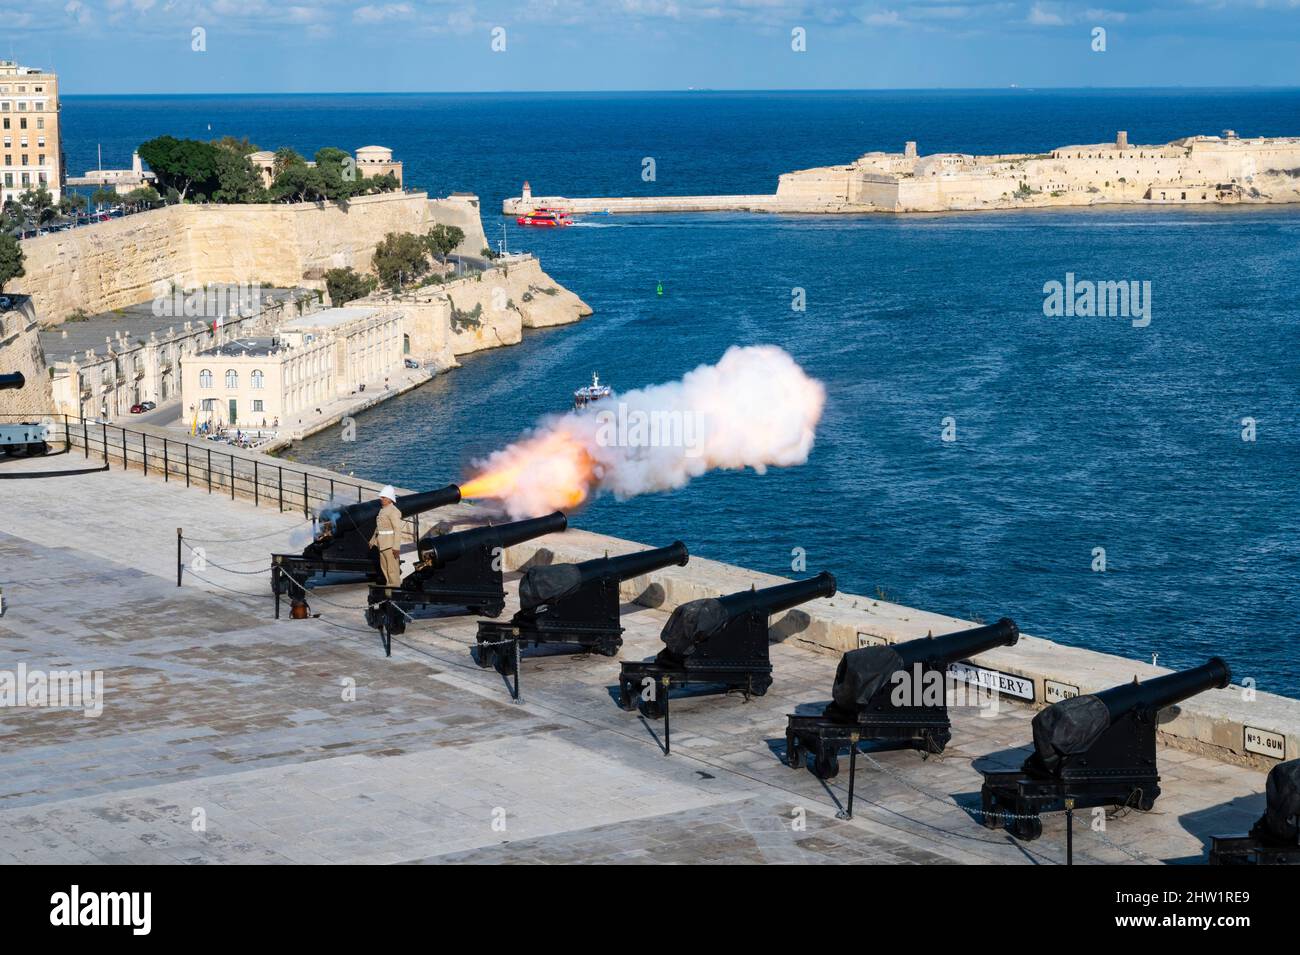 Malta, Valletta, city listed by UNESCO as Worlheritage, grand Harbour and the Upper Barrakka Gardens, terrace of the public garden founded in the eighteenth century with the canons of the salutation battery Stock Photo